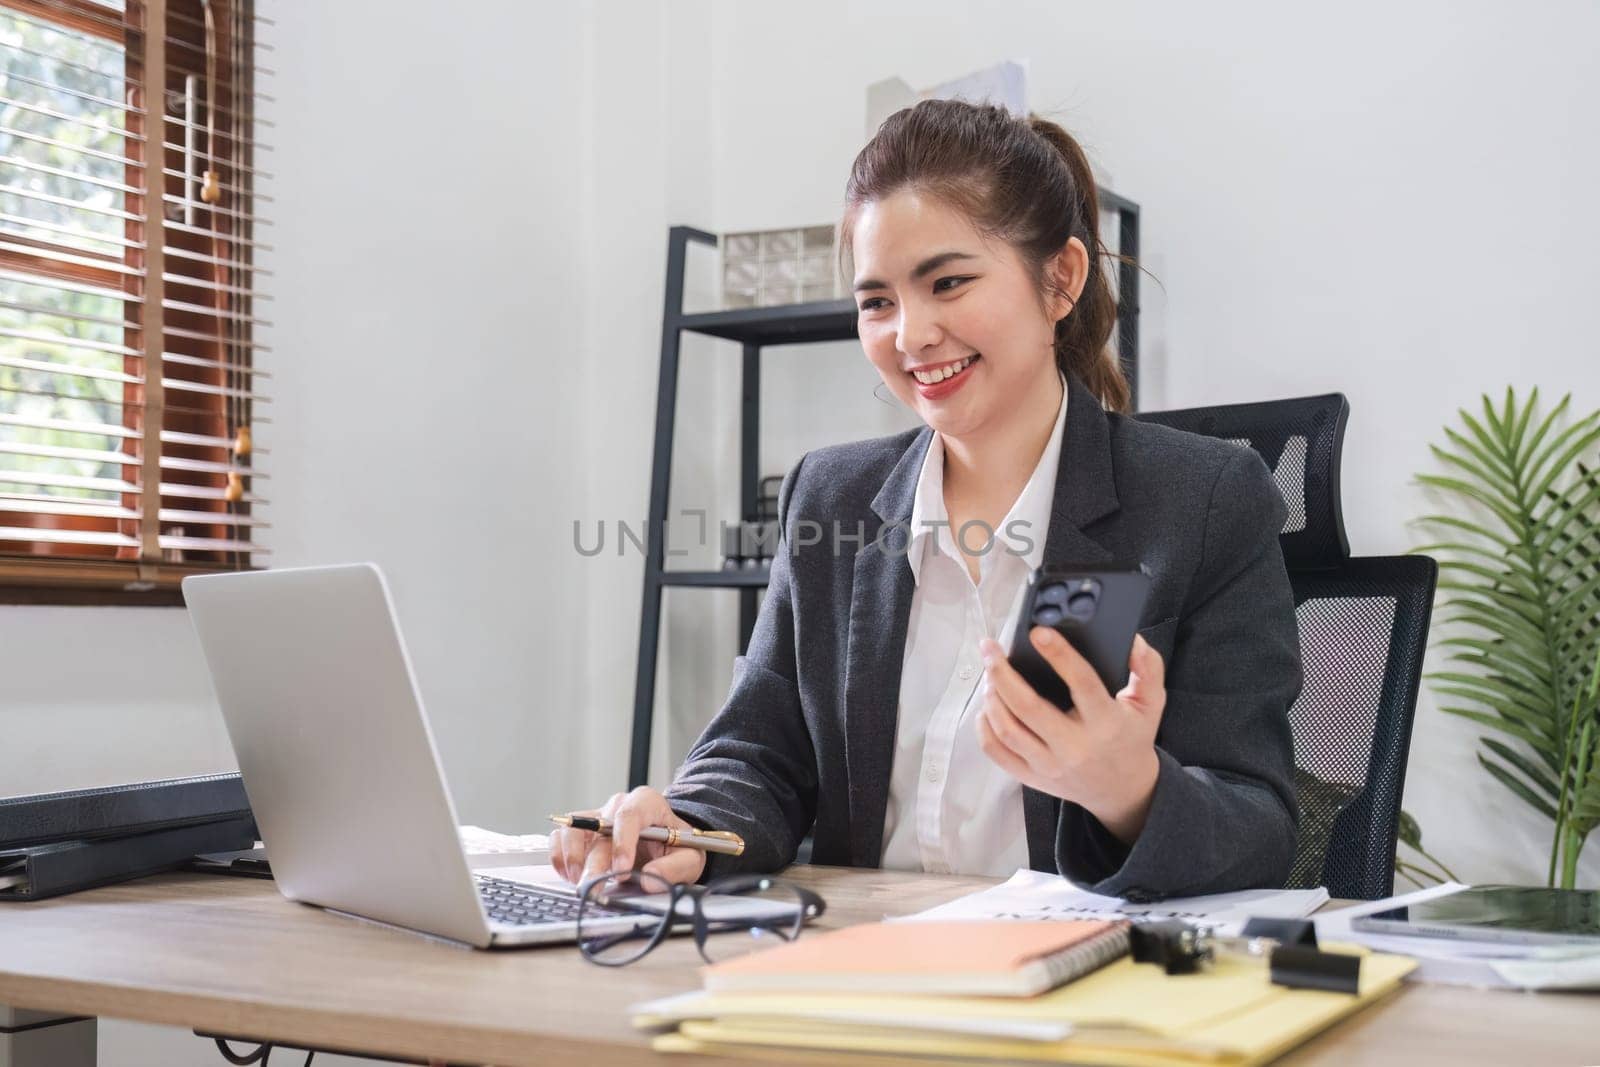 Businesswoman talking on business phone and using laptop to do finance, mathematics on wooden table in office and business background, tax, accounting, statistics and analytical research concepts..